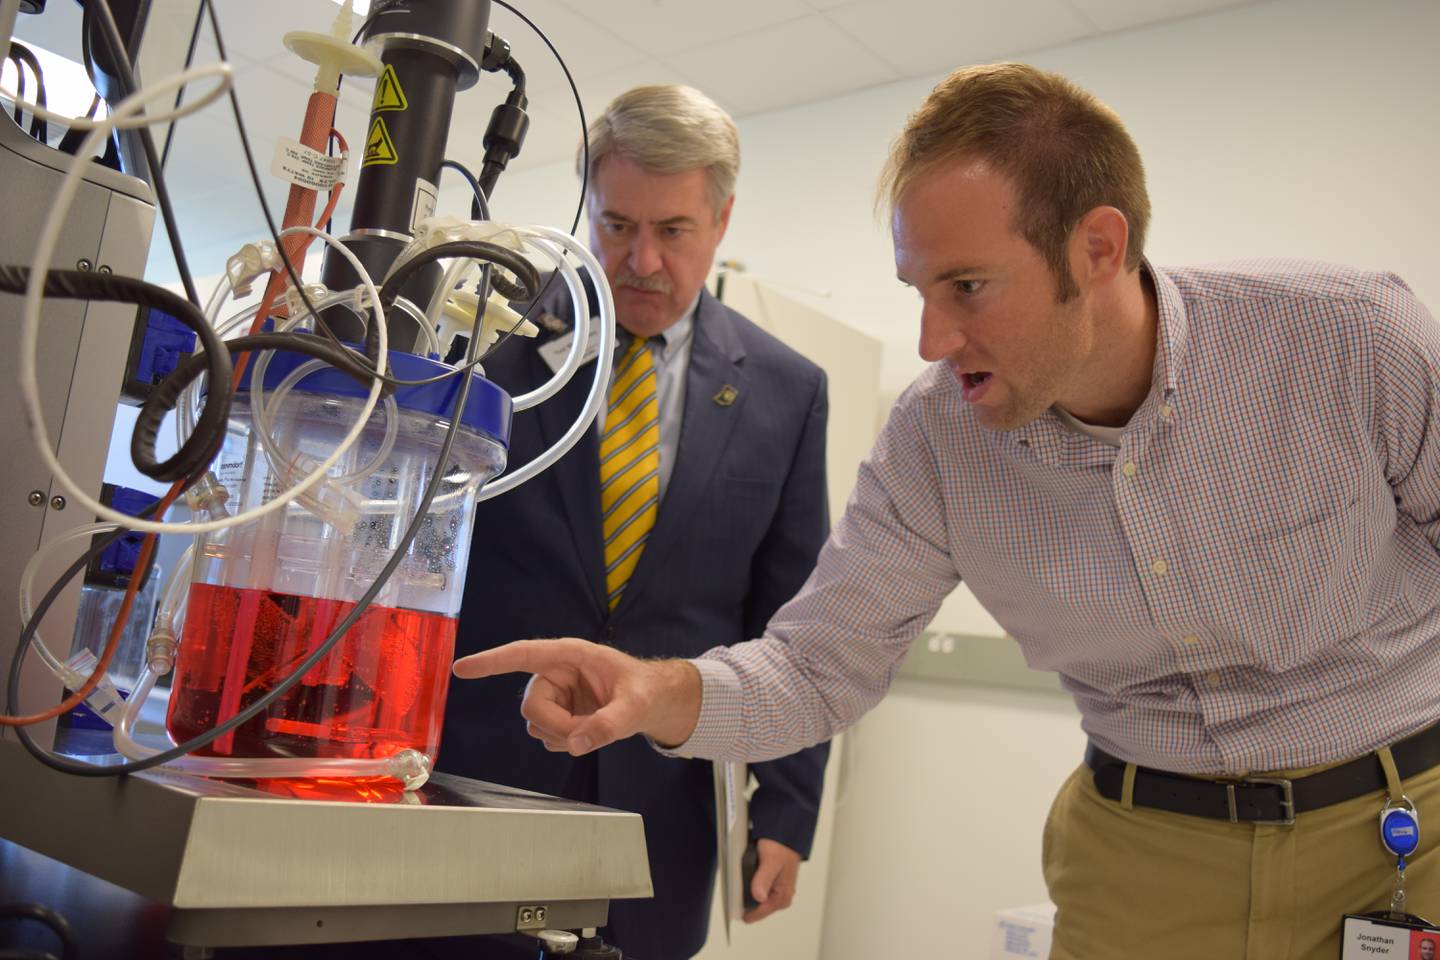 Ted McKinney (left) and Jonathan Snyder, research scientist at Elanco Animal Health, check out a bioreactor that is used to grow cells. The reactor is part of a lab in the Vaccines Innovation Center. Companies like Elanco offer a variety of jobs ranging from laboratory work to corporate communications.